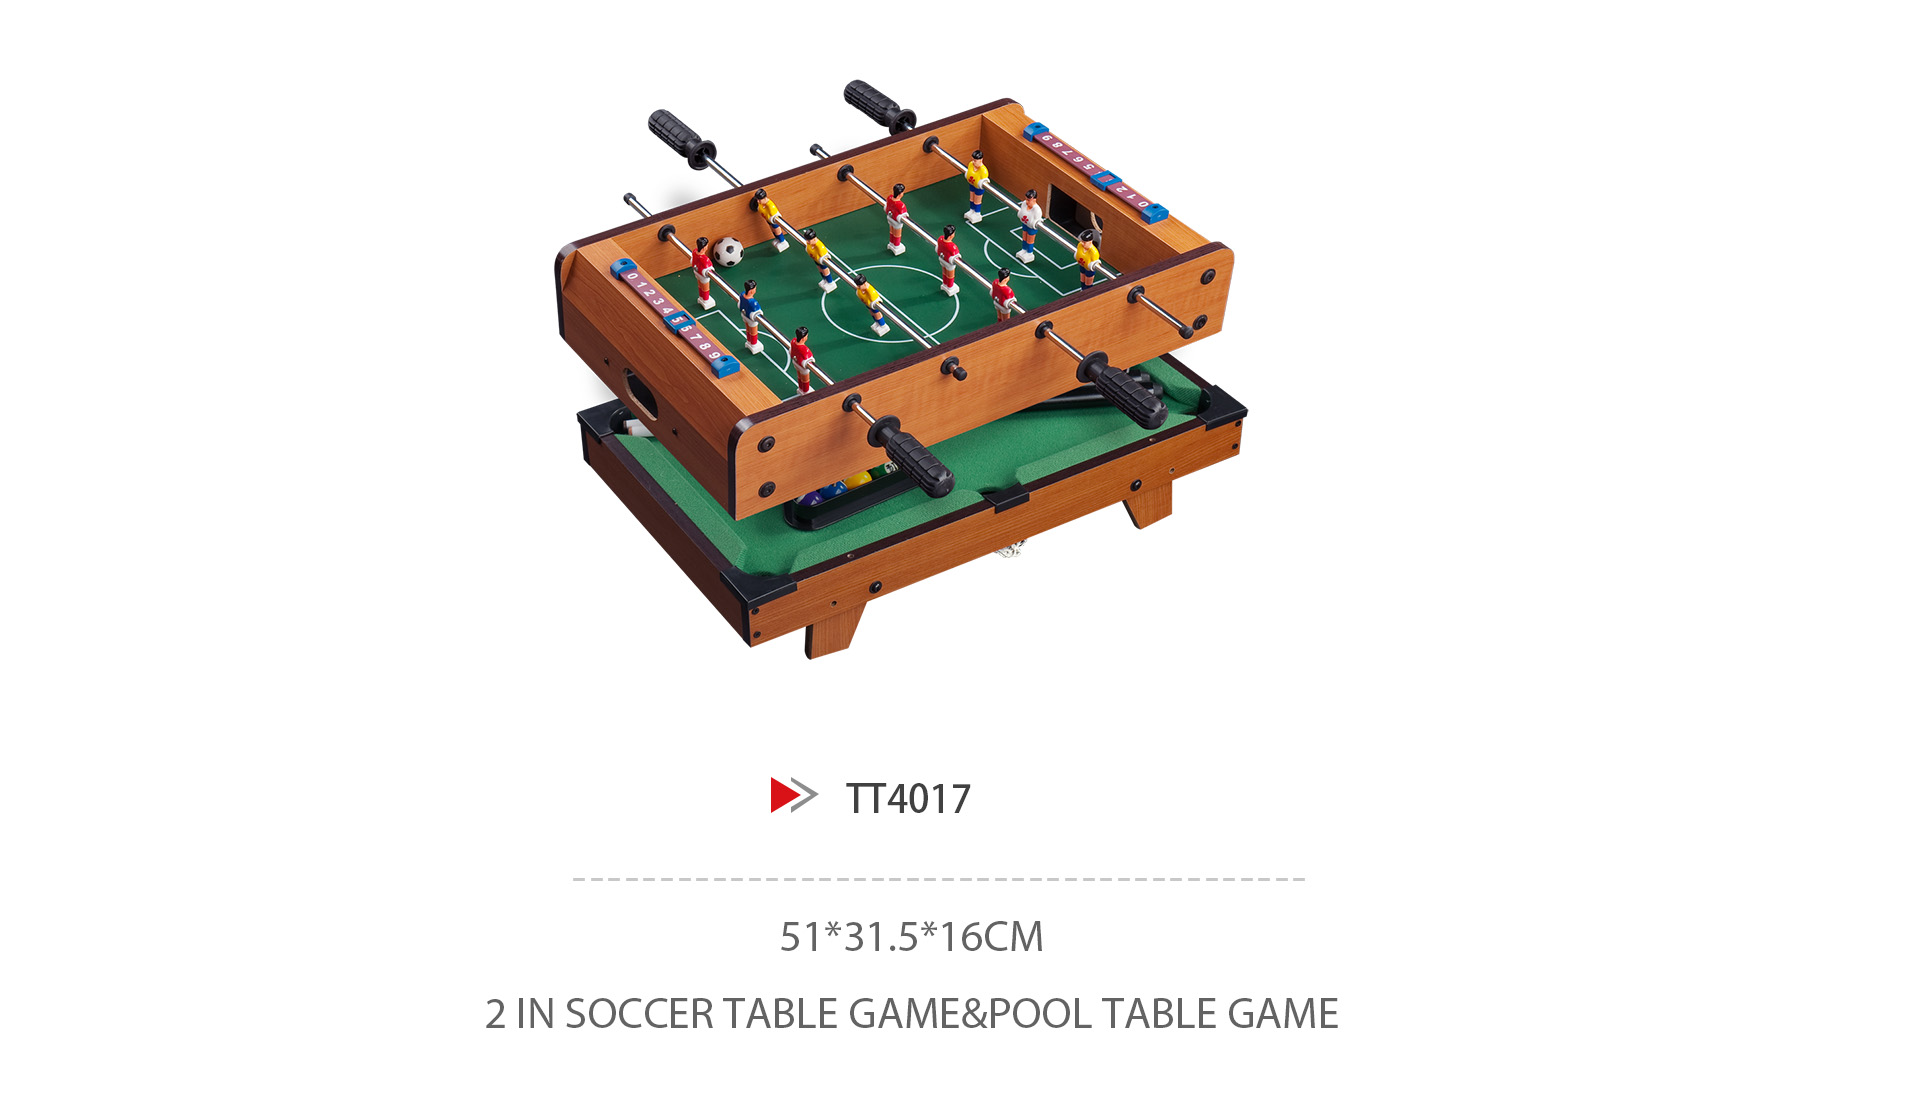 TT4017 2 IN 1 TABLE GAME